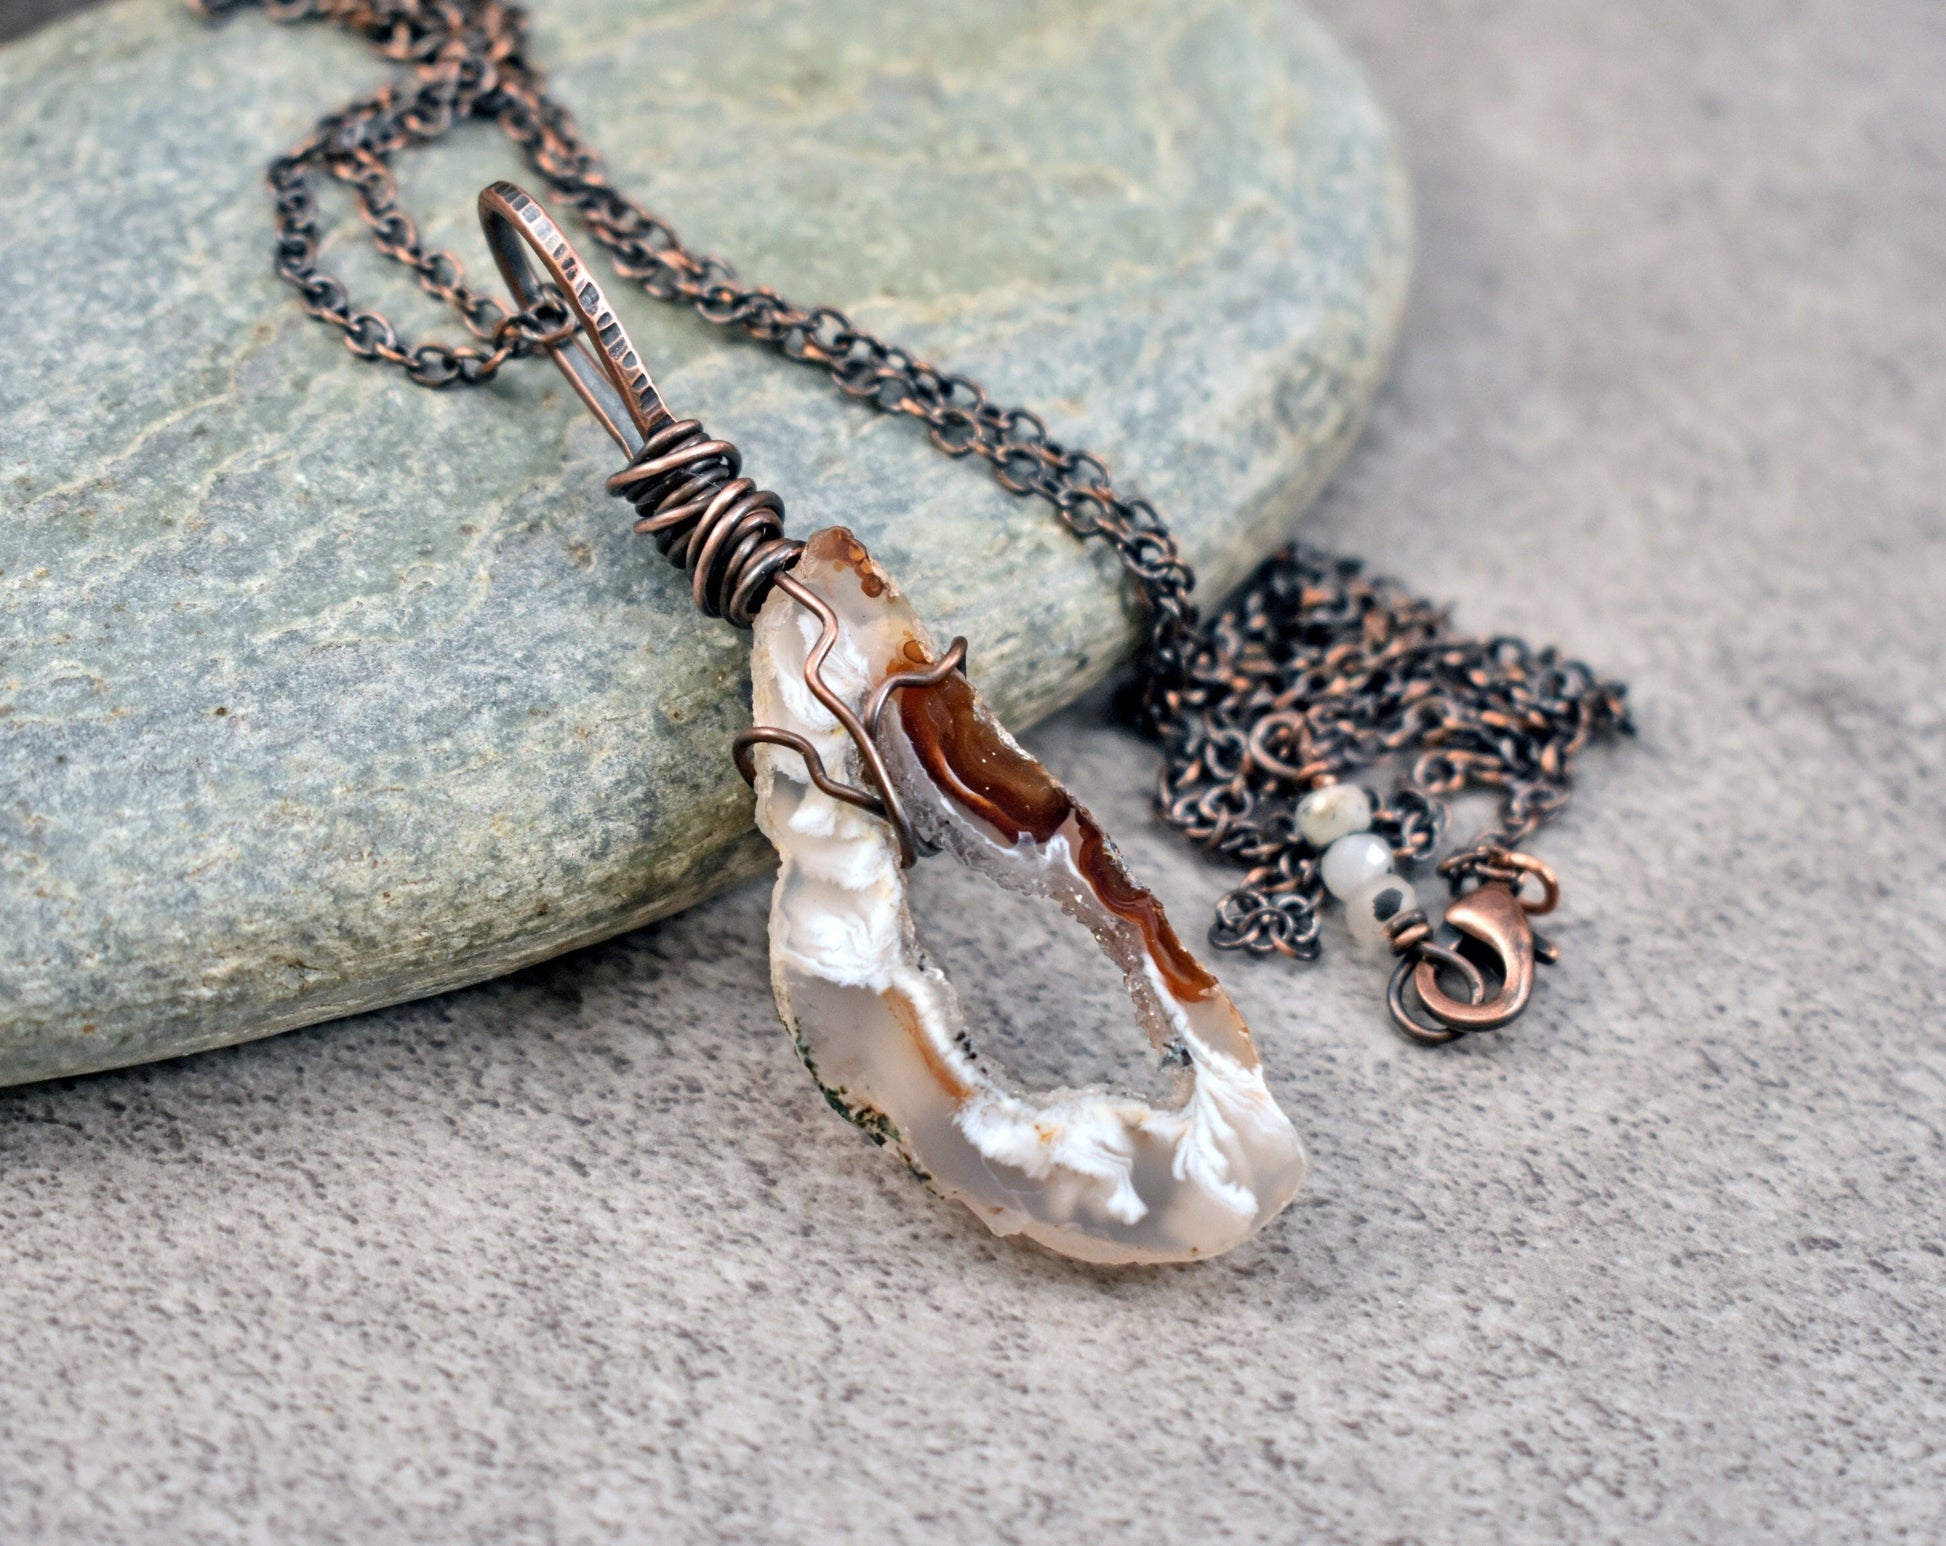 Oco Agate Druzy Necklace, Natural Crystal Black and White Stone Pendant, Copper Wire Gemstone Jewelry Handmade